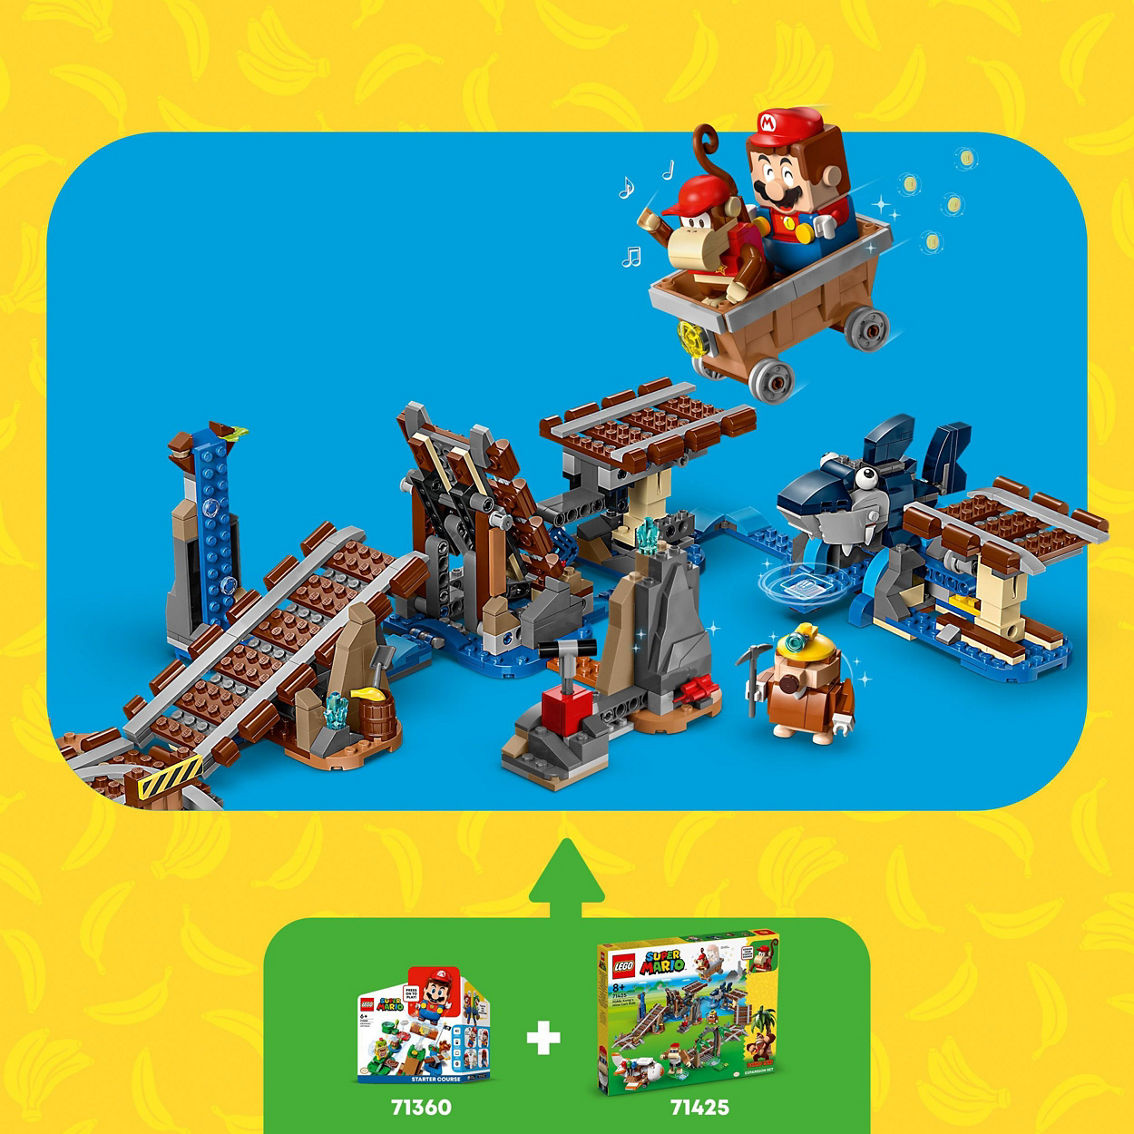 LEGO Super Mario Diddy Kong's Mine Cart Ride Expansion Set 71425 - Image 8 of 10